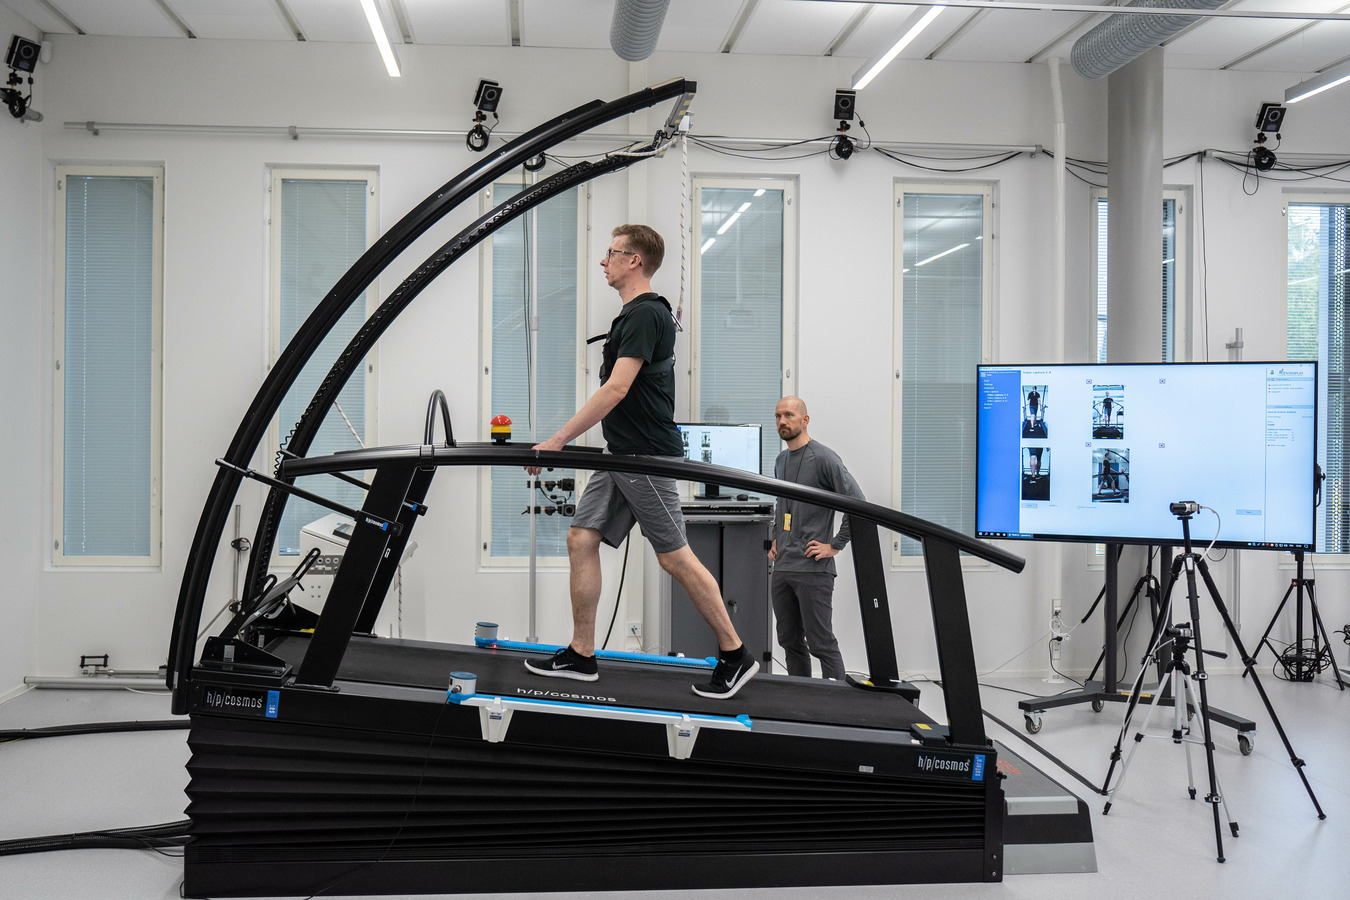 Man walking on treadmil, behind the treadmill two movement analysis cameras and big screen. An other man standing and watching the situation.